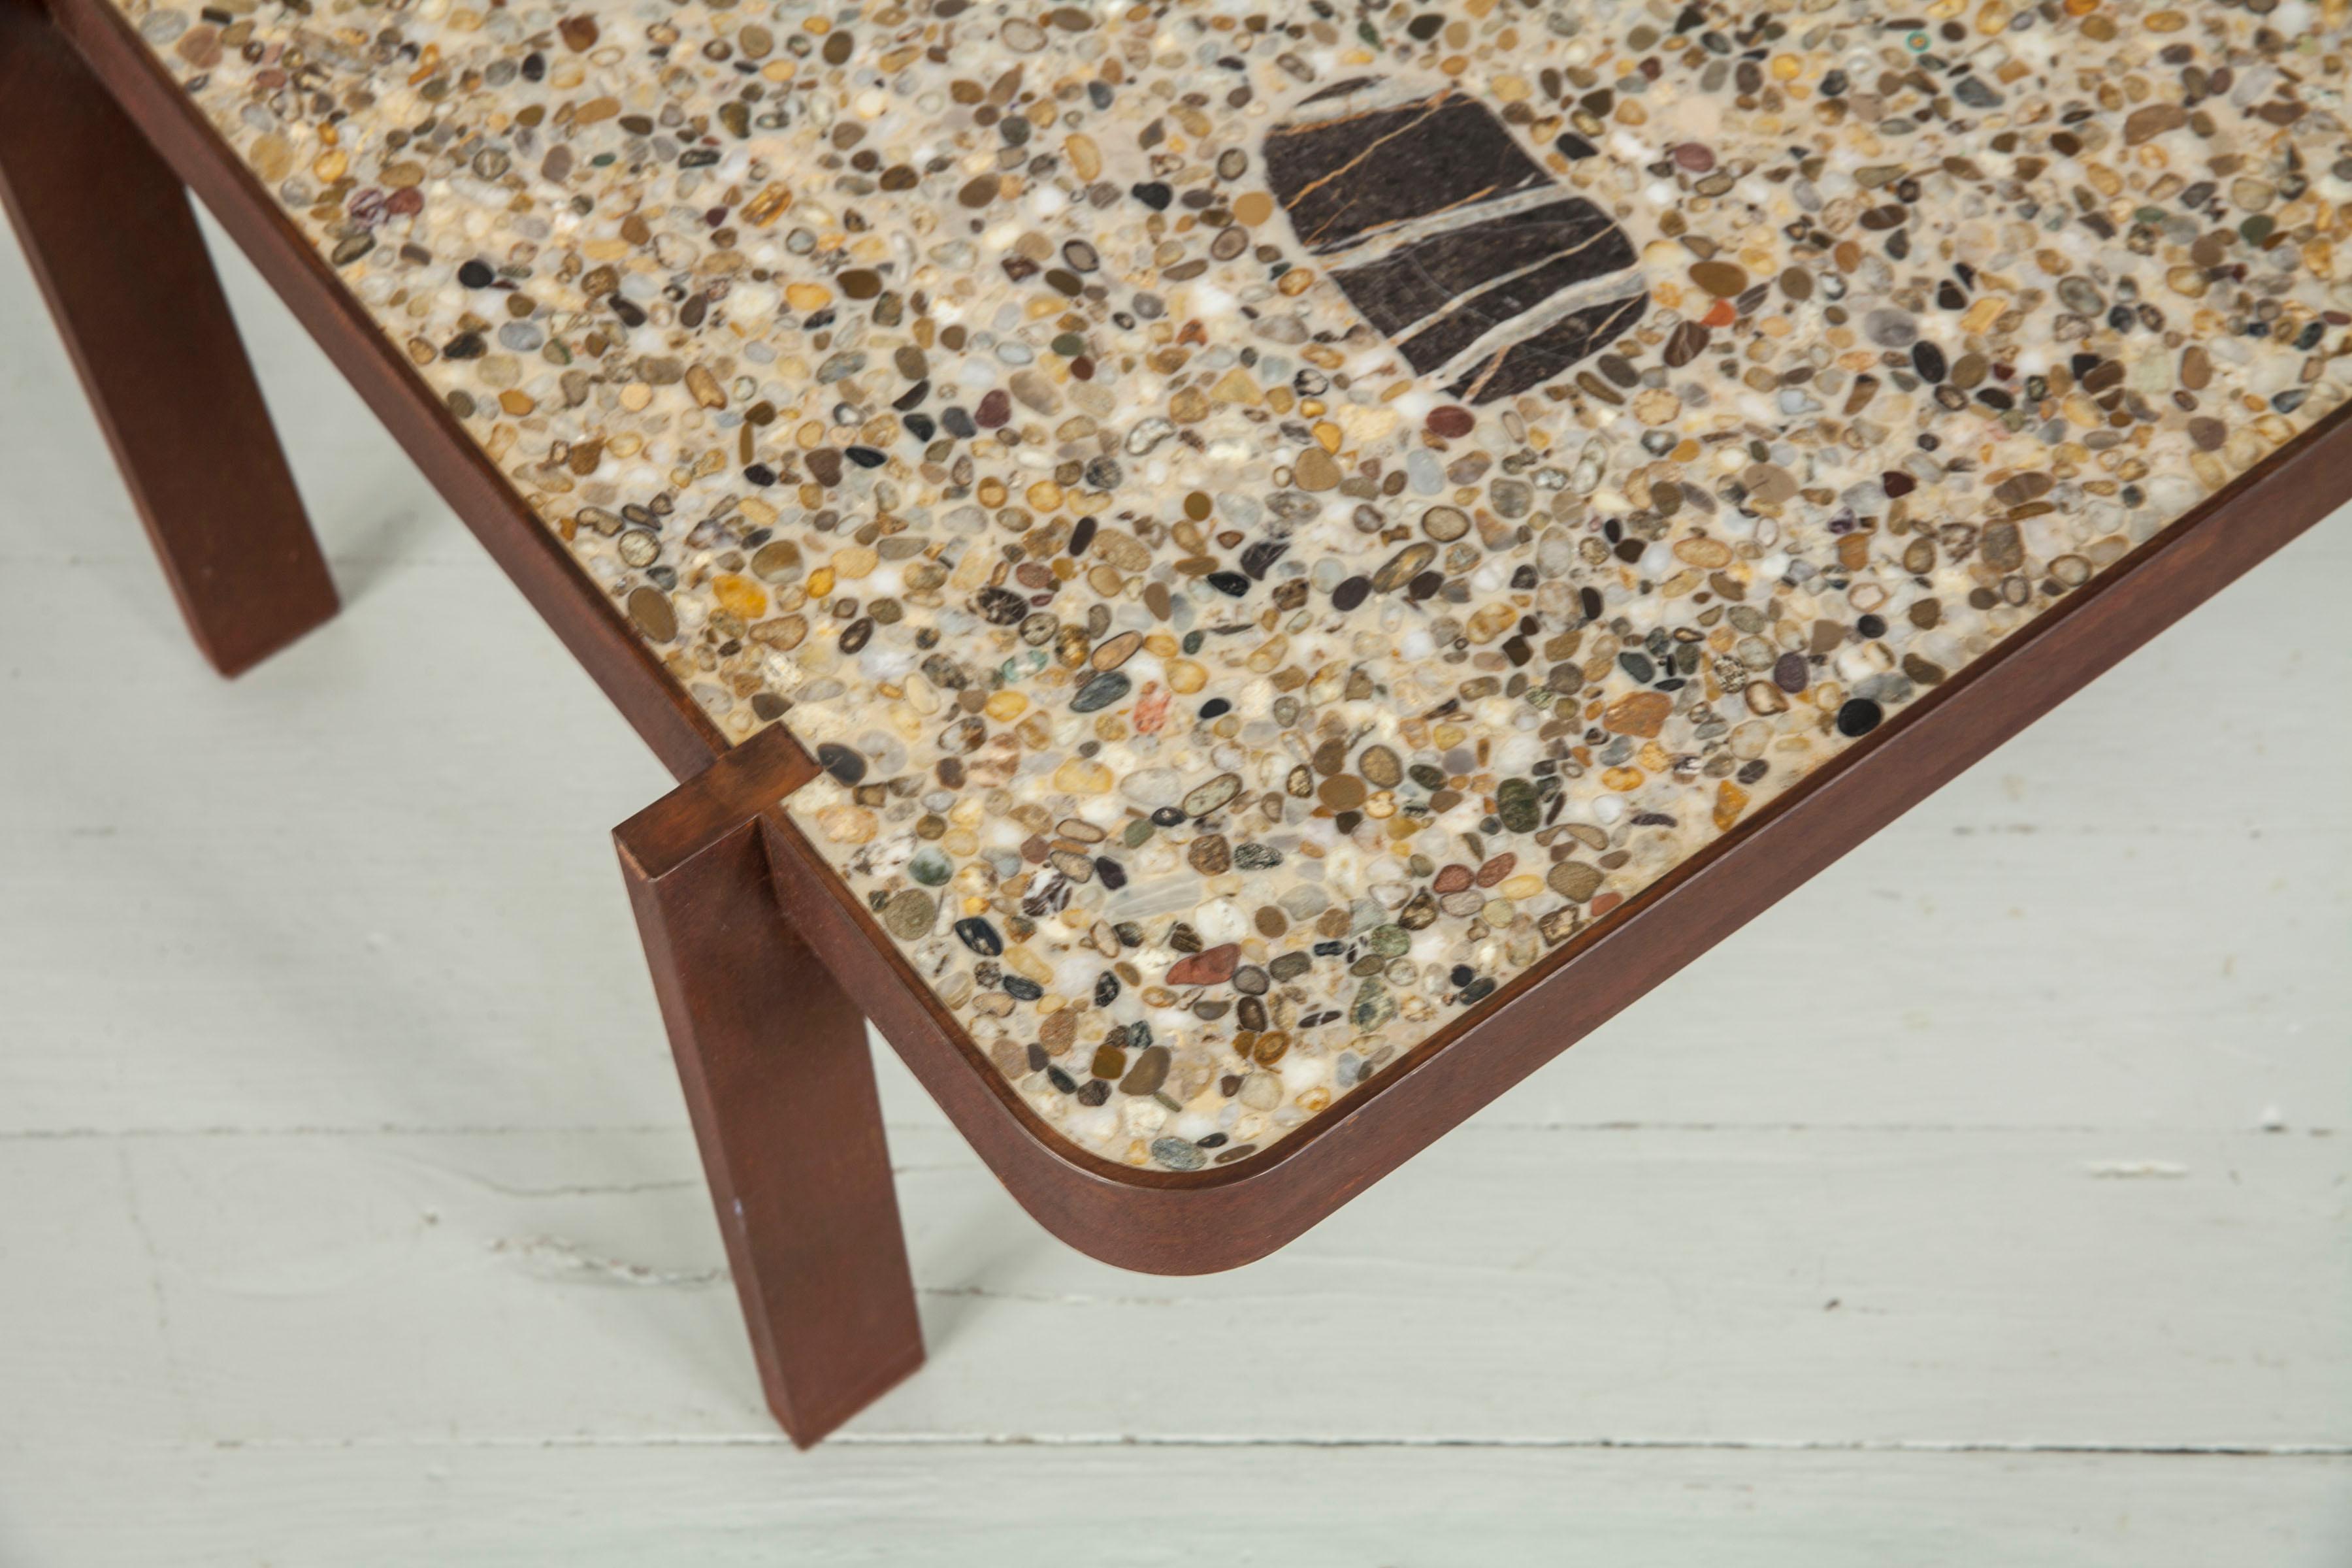 Felix Muhrhofer Contemporary Terrazzo Table with Corroded Steel Construction 4